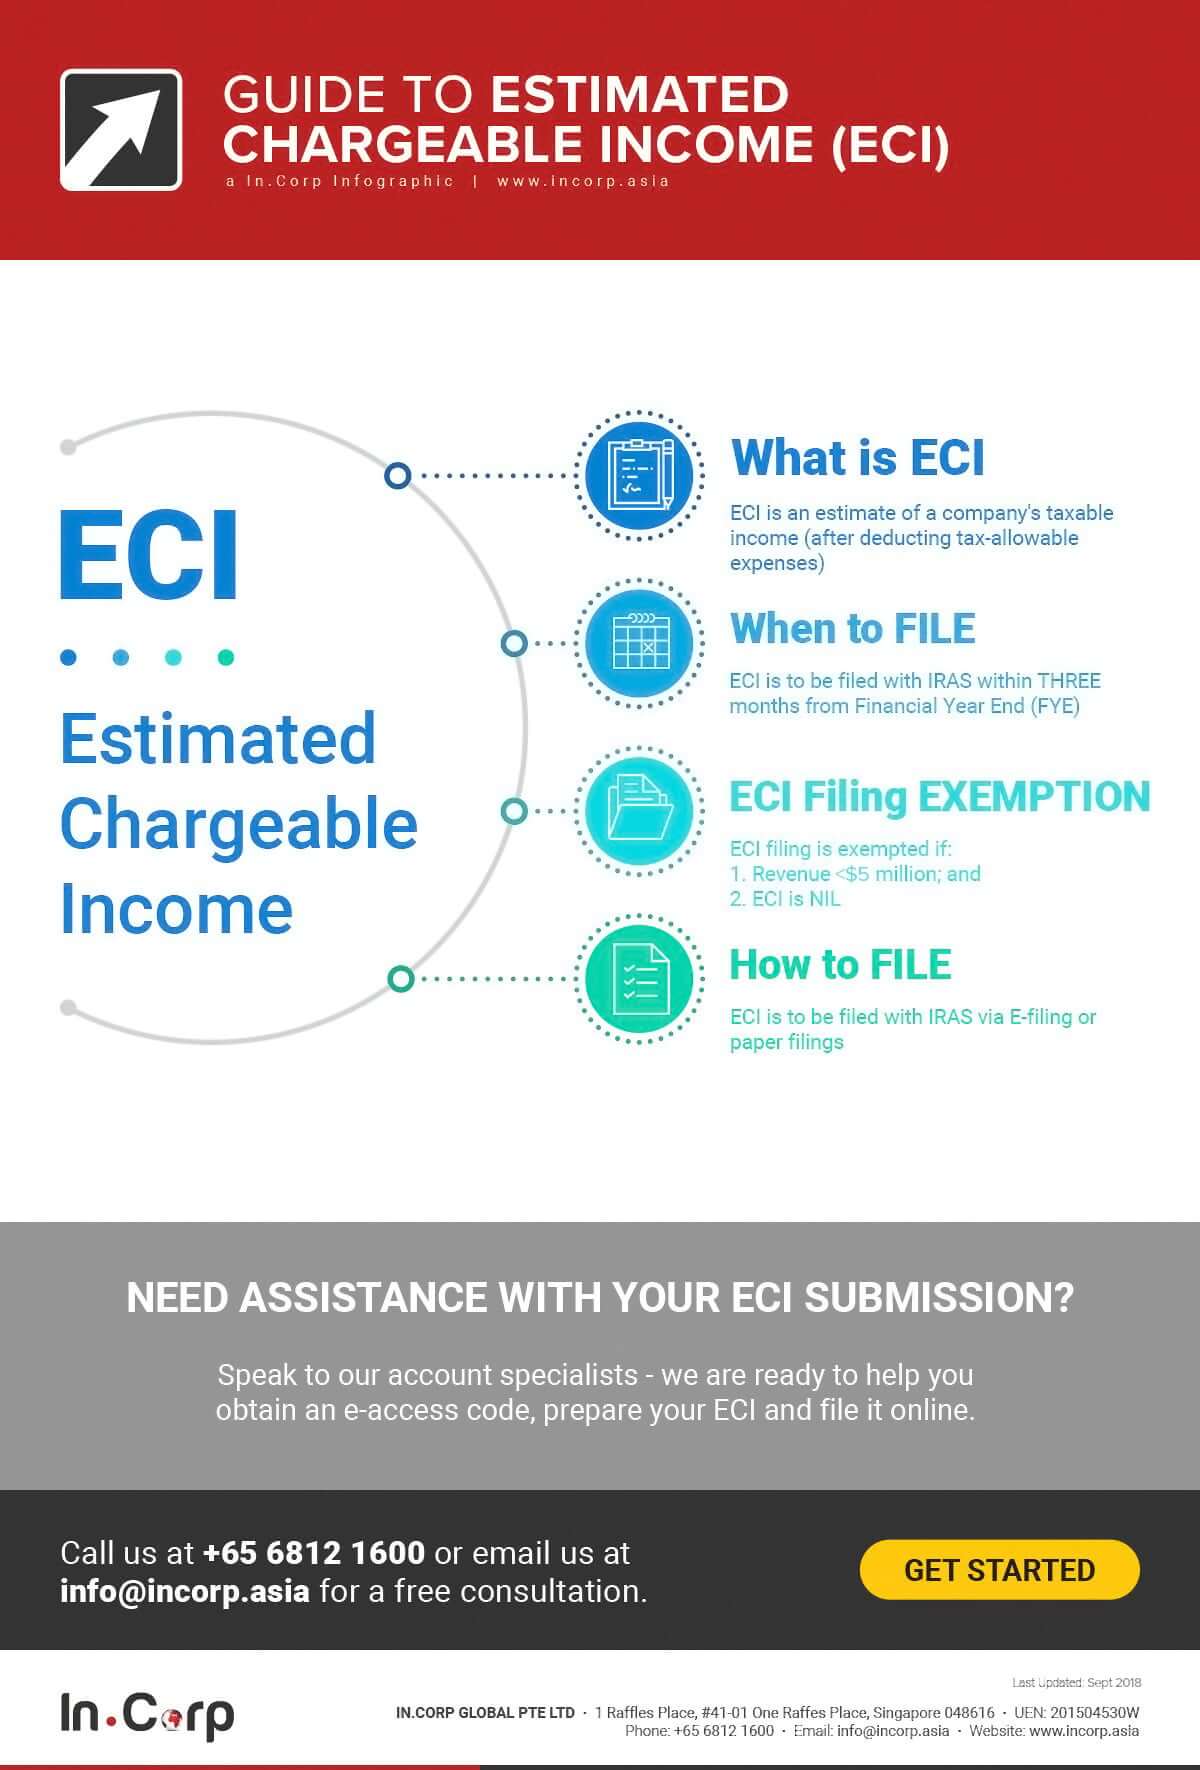 understanding estimated chargeable income